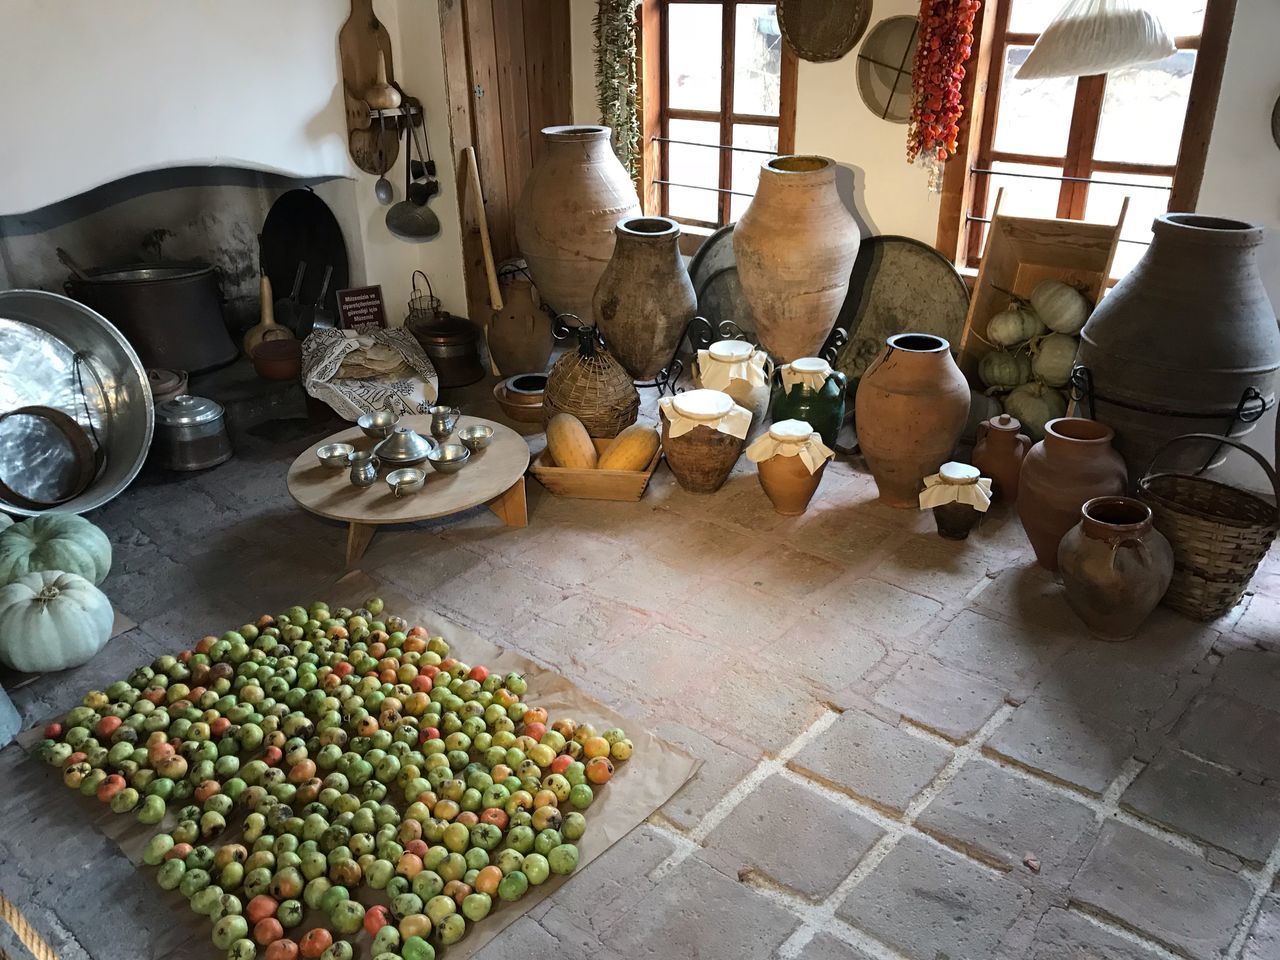 HIGH ANGLE VIEW OF VARIOUS FRUITS ON TABLE